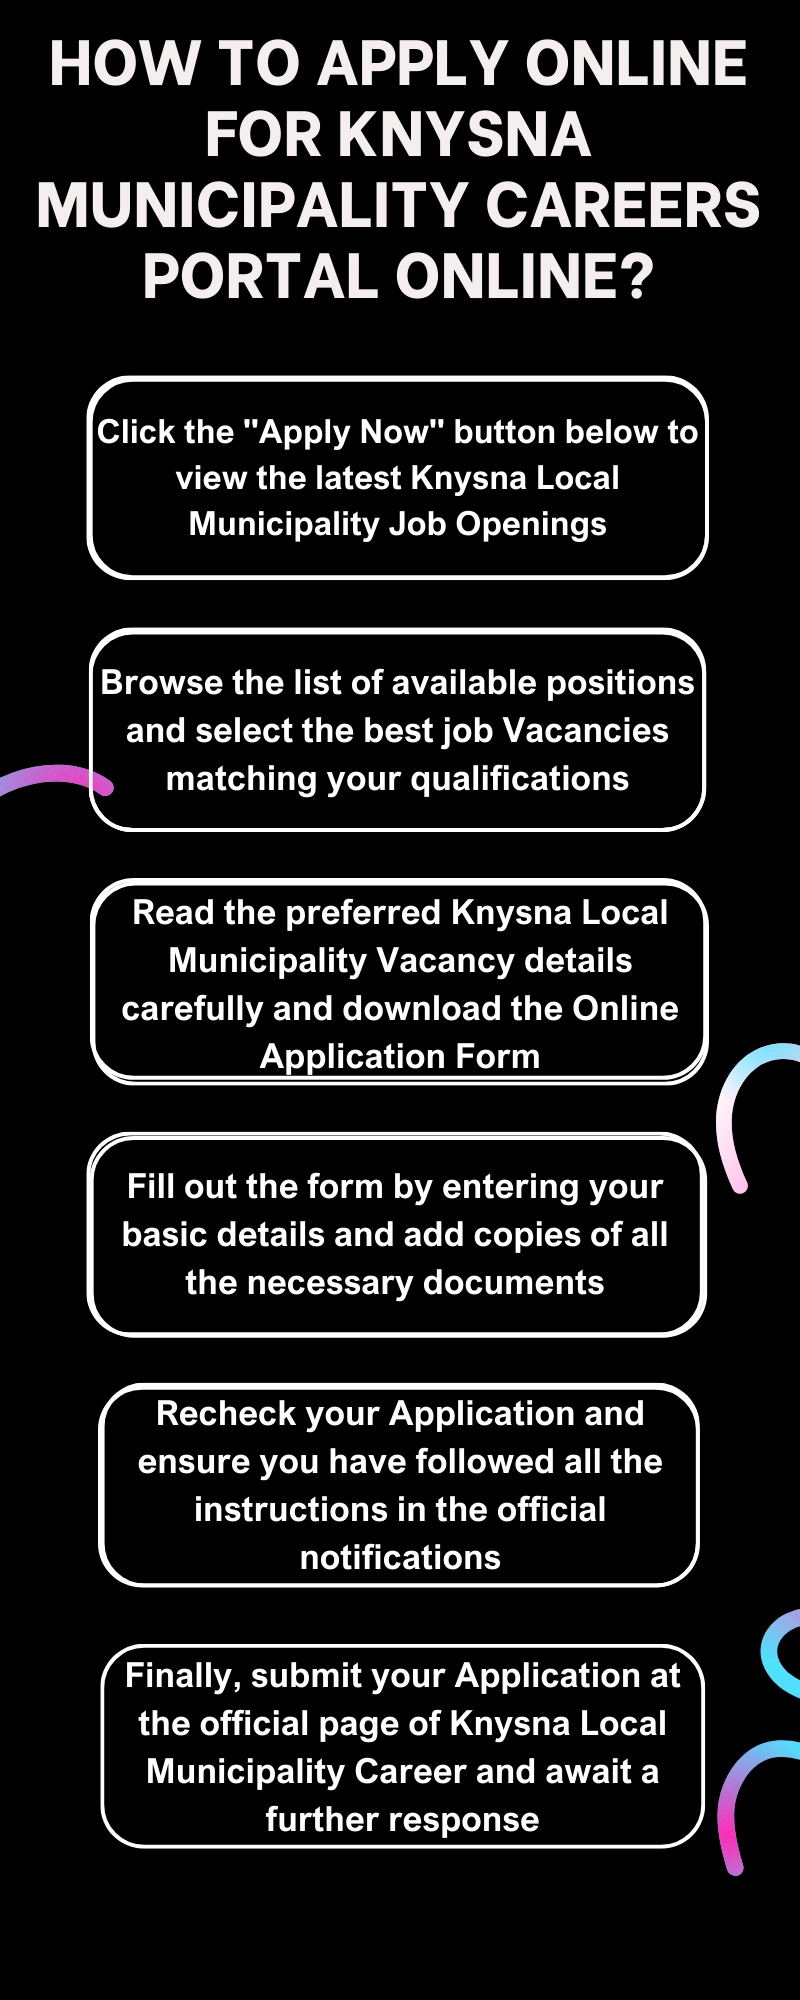 How to Apply online for Knysna Municipality Careers Portal Online?